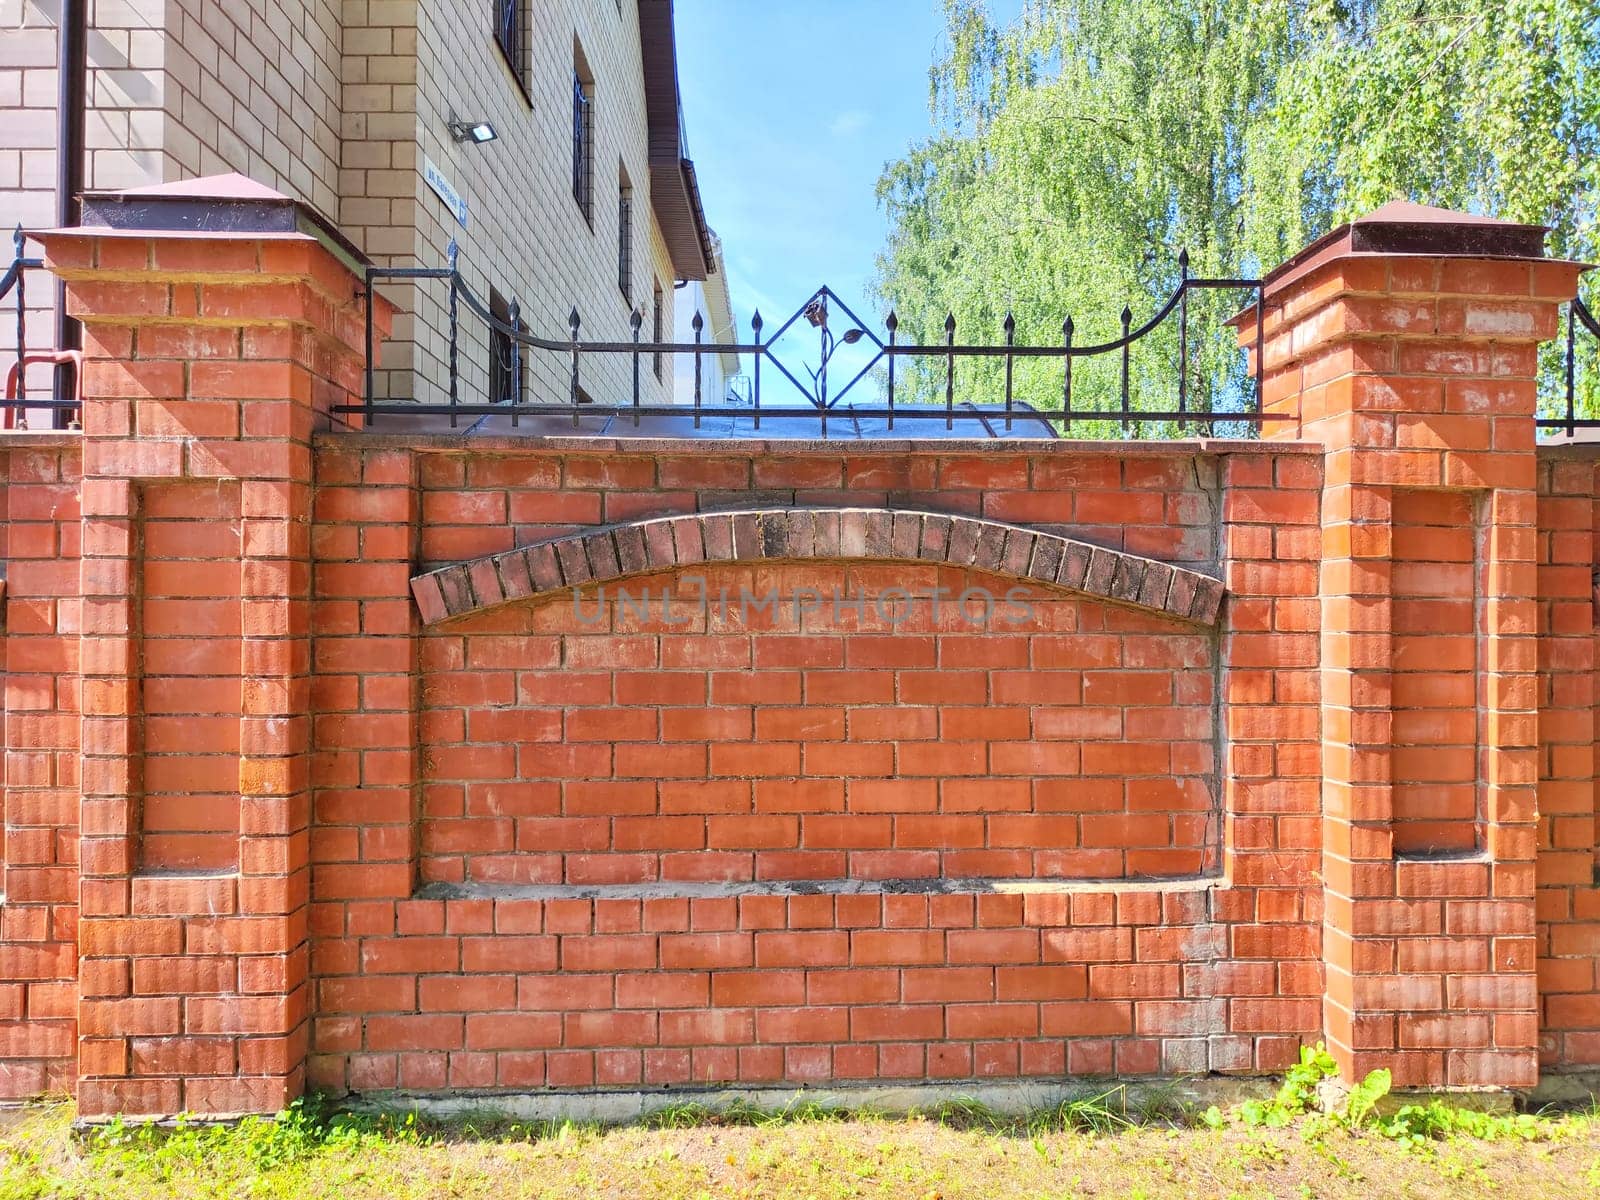 Red Brick Wall With Arch Detail in Urban Setting. Red brick wall featuring an arch design on a sunny day by keleny